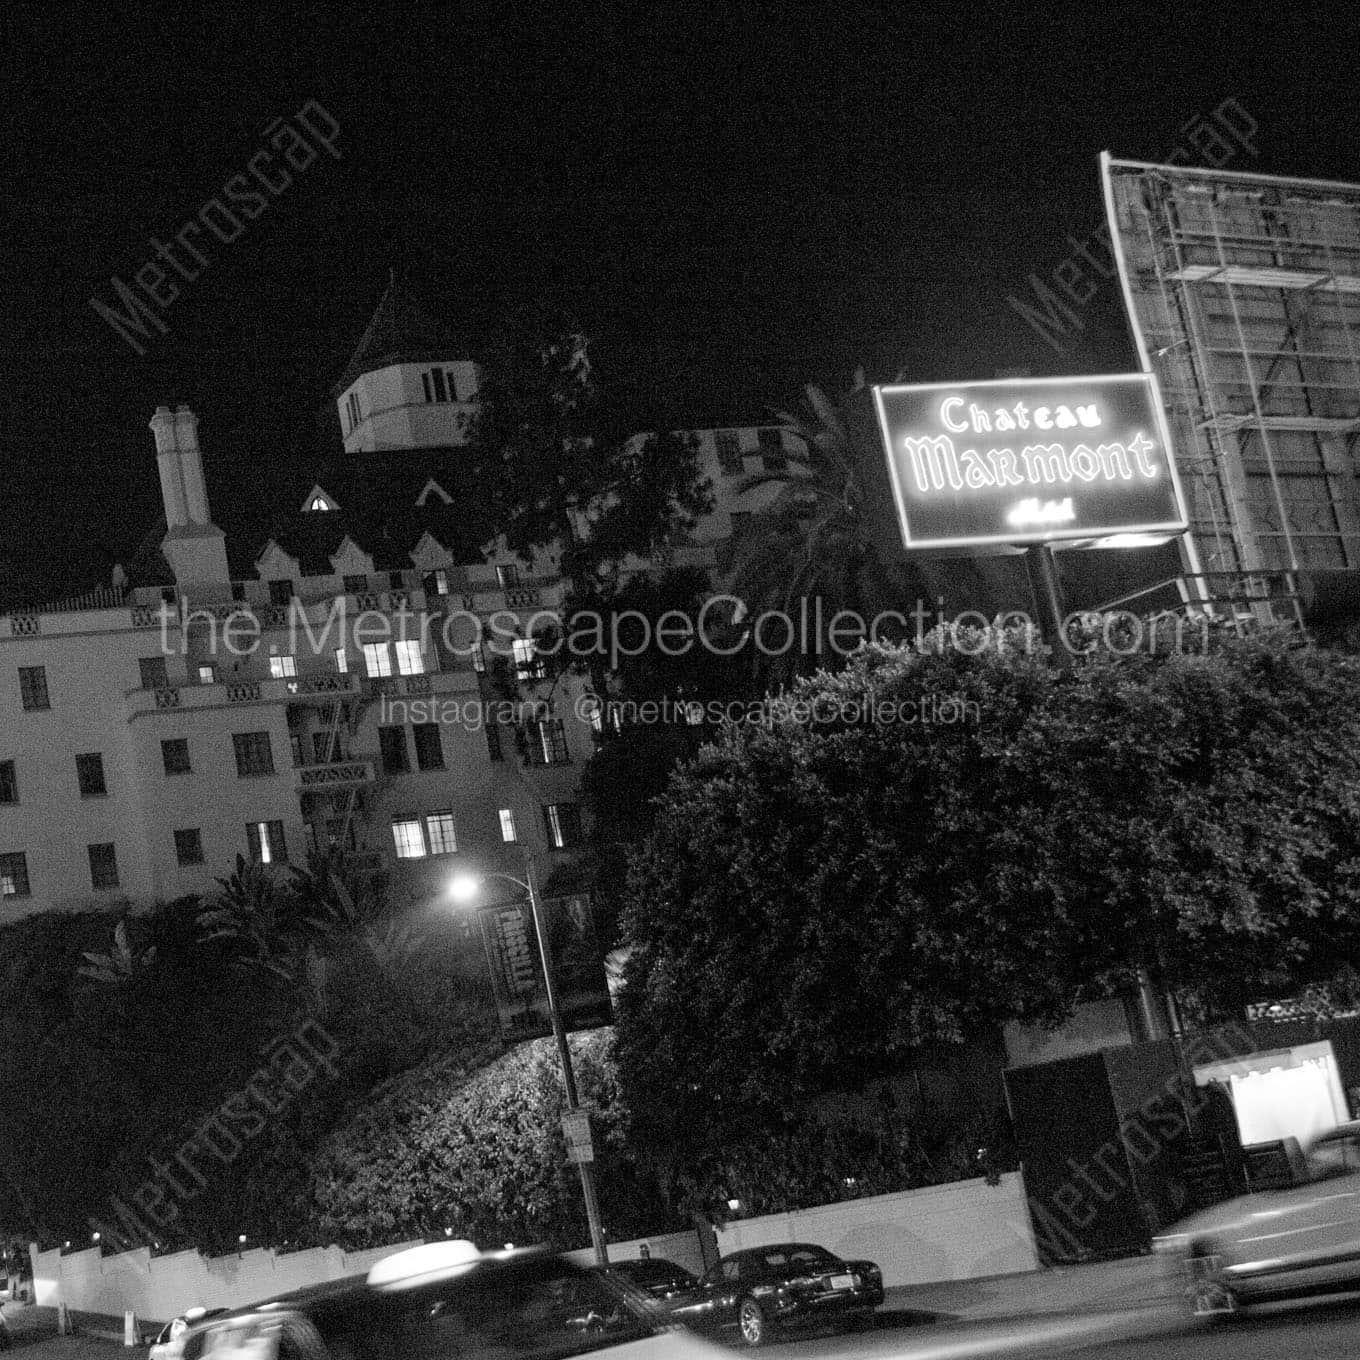 chateau marmont at night Black & White Office Art